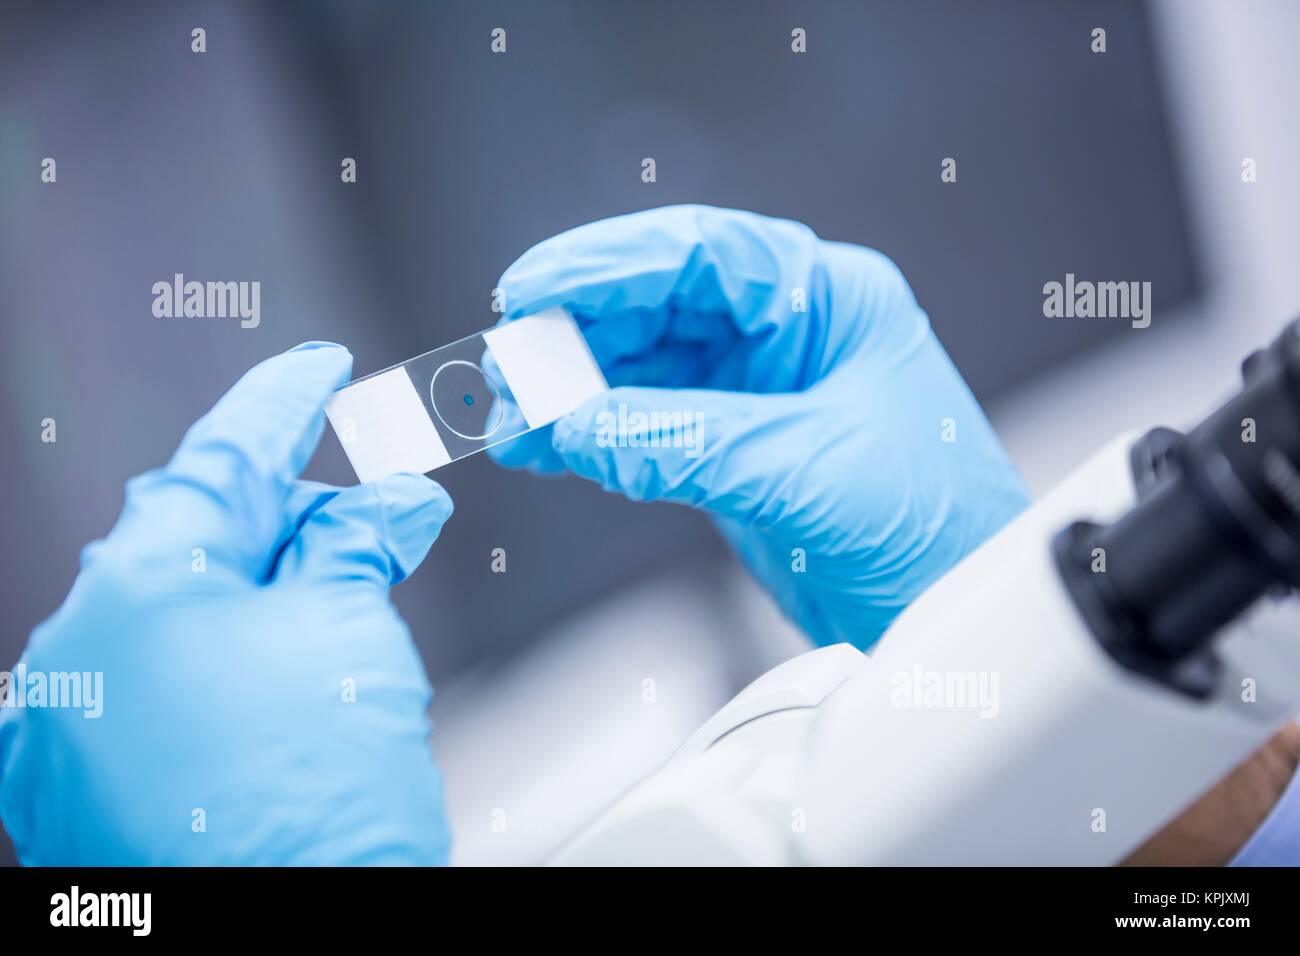 Scientist holding microscope slide, close up. Stock Photo